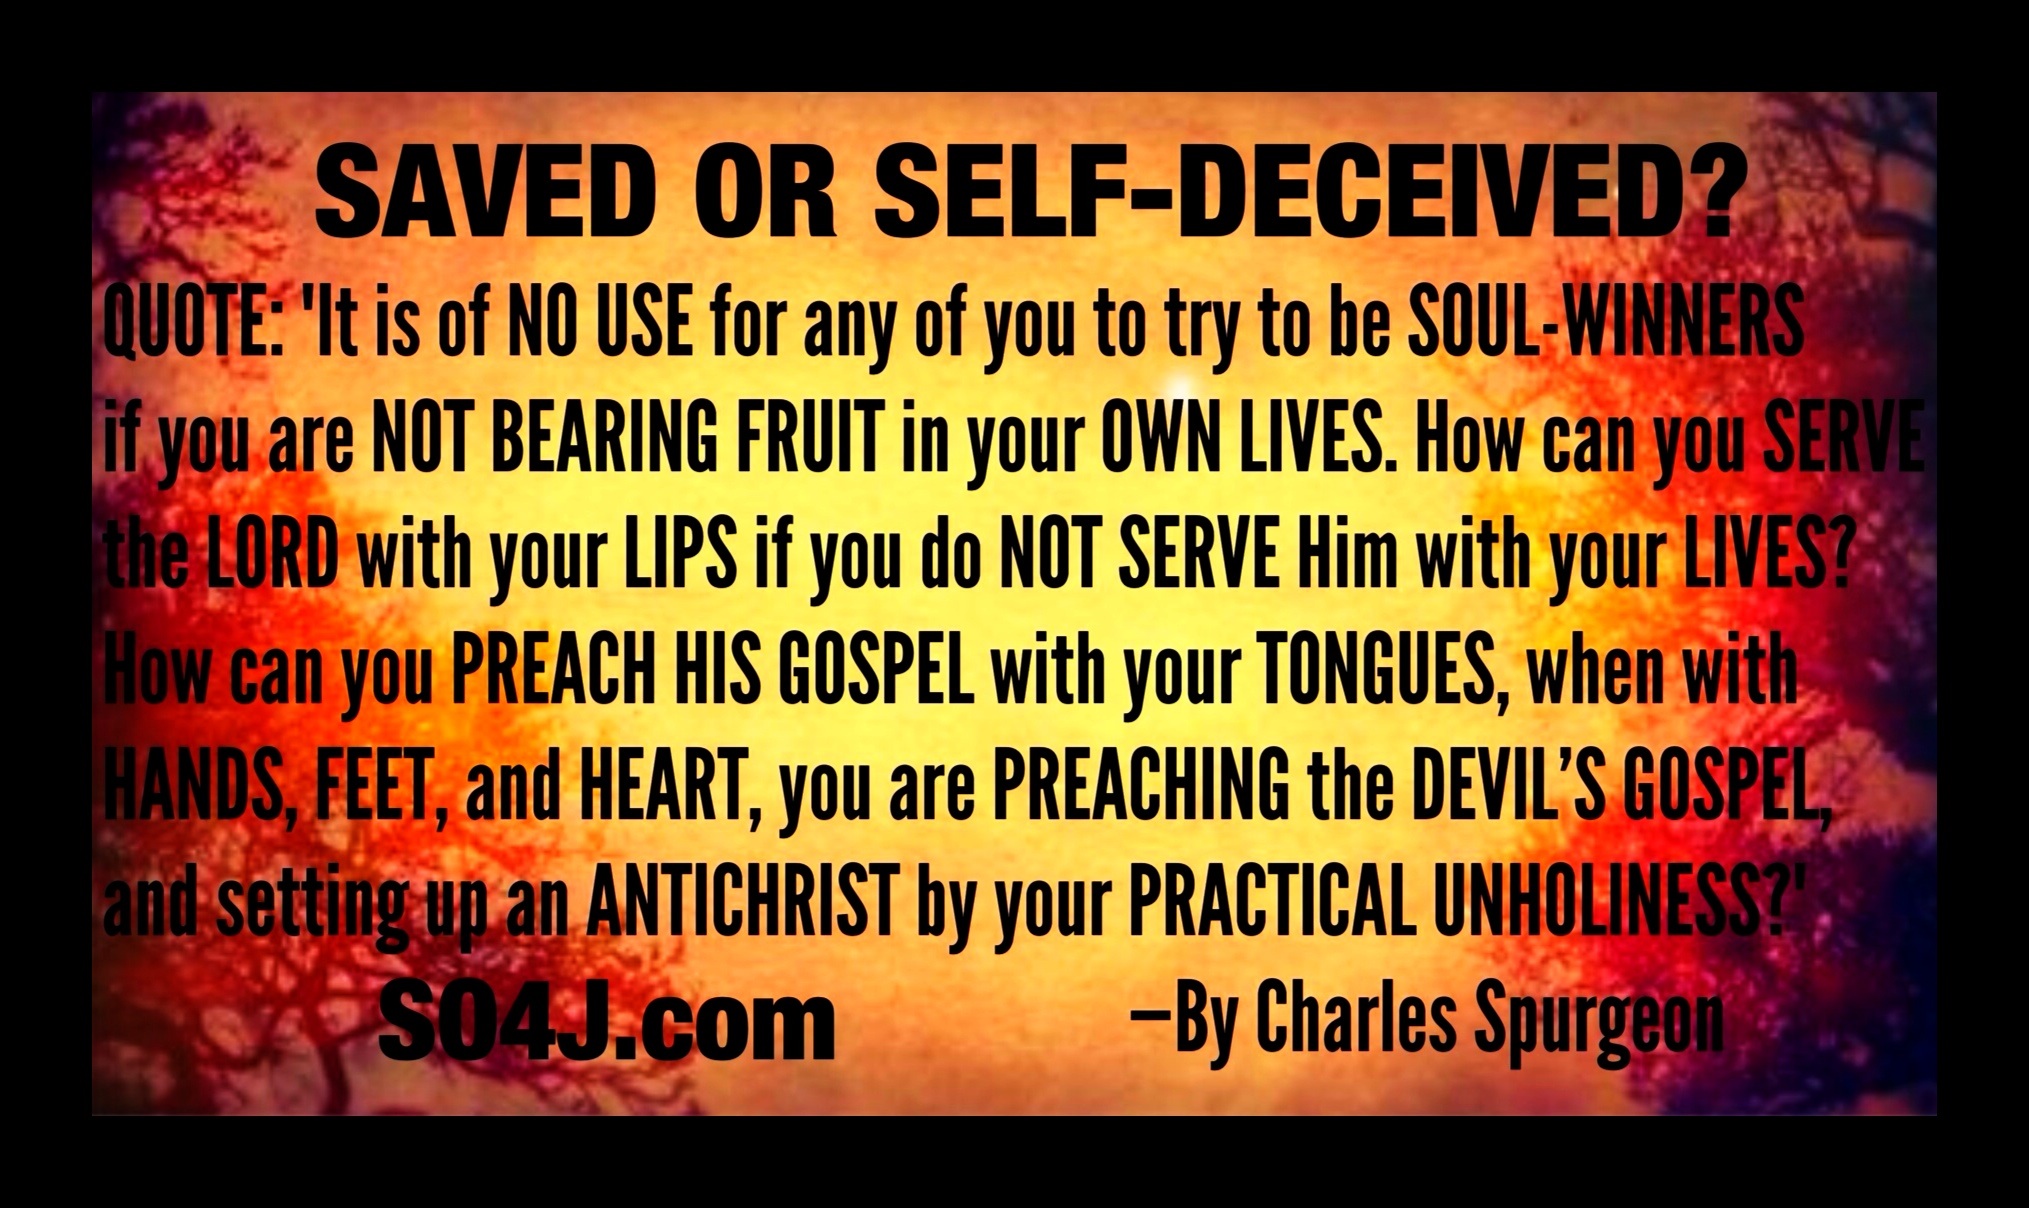 Are you Truly Saved or are you Self-Deceived? Examine Your Faith with God's Word! (2 Cor 13:5) - SO4J-TV SO4J.com 